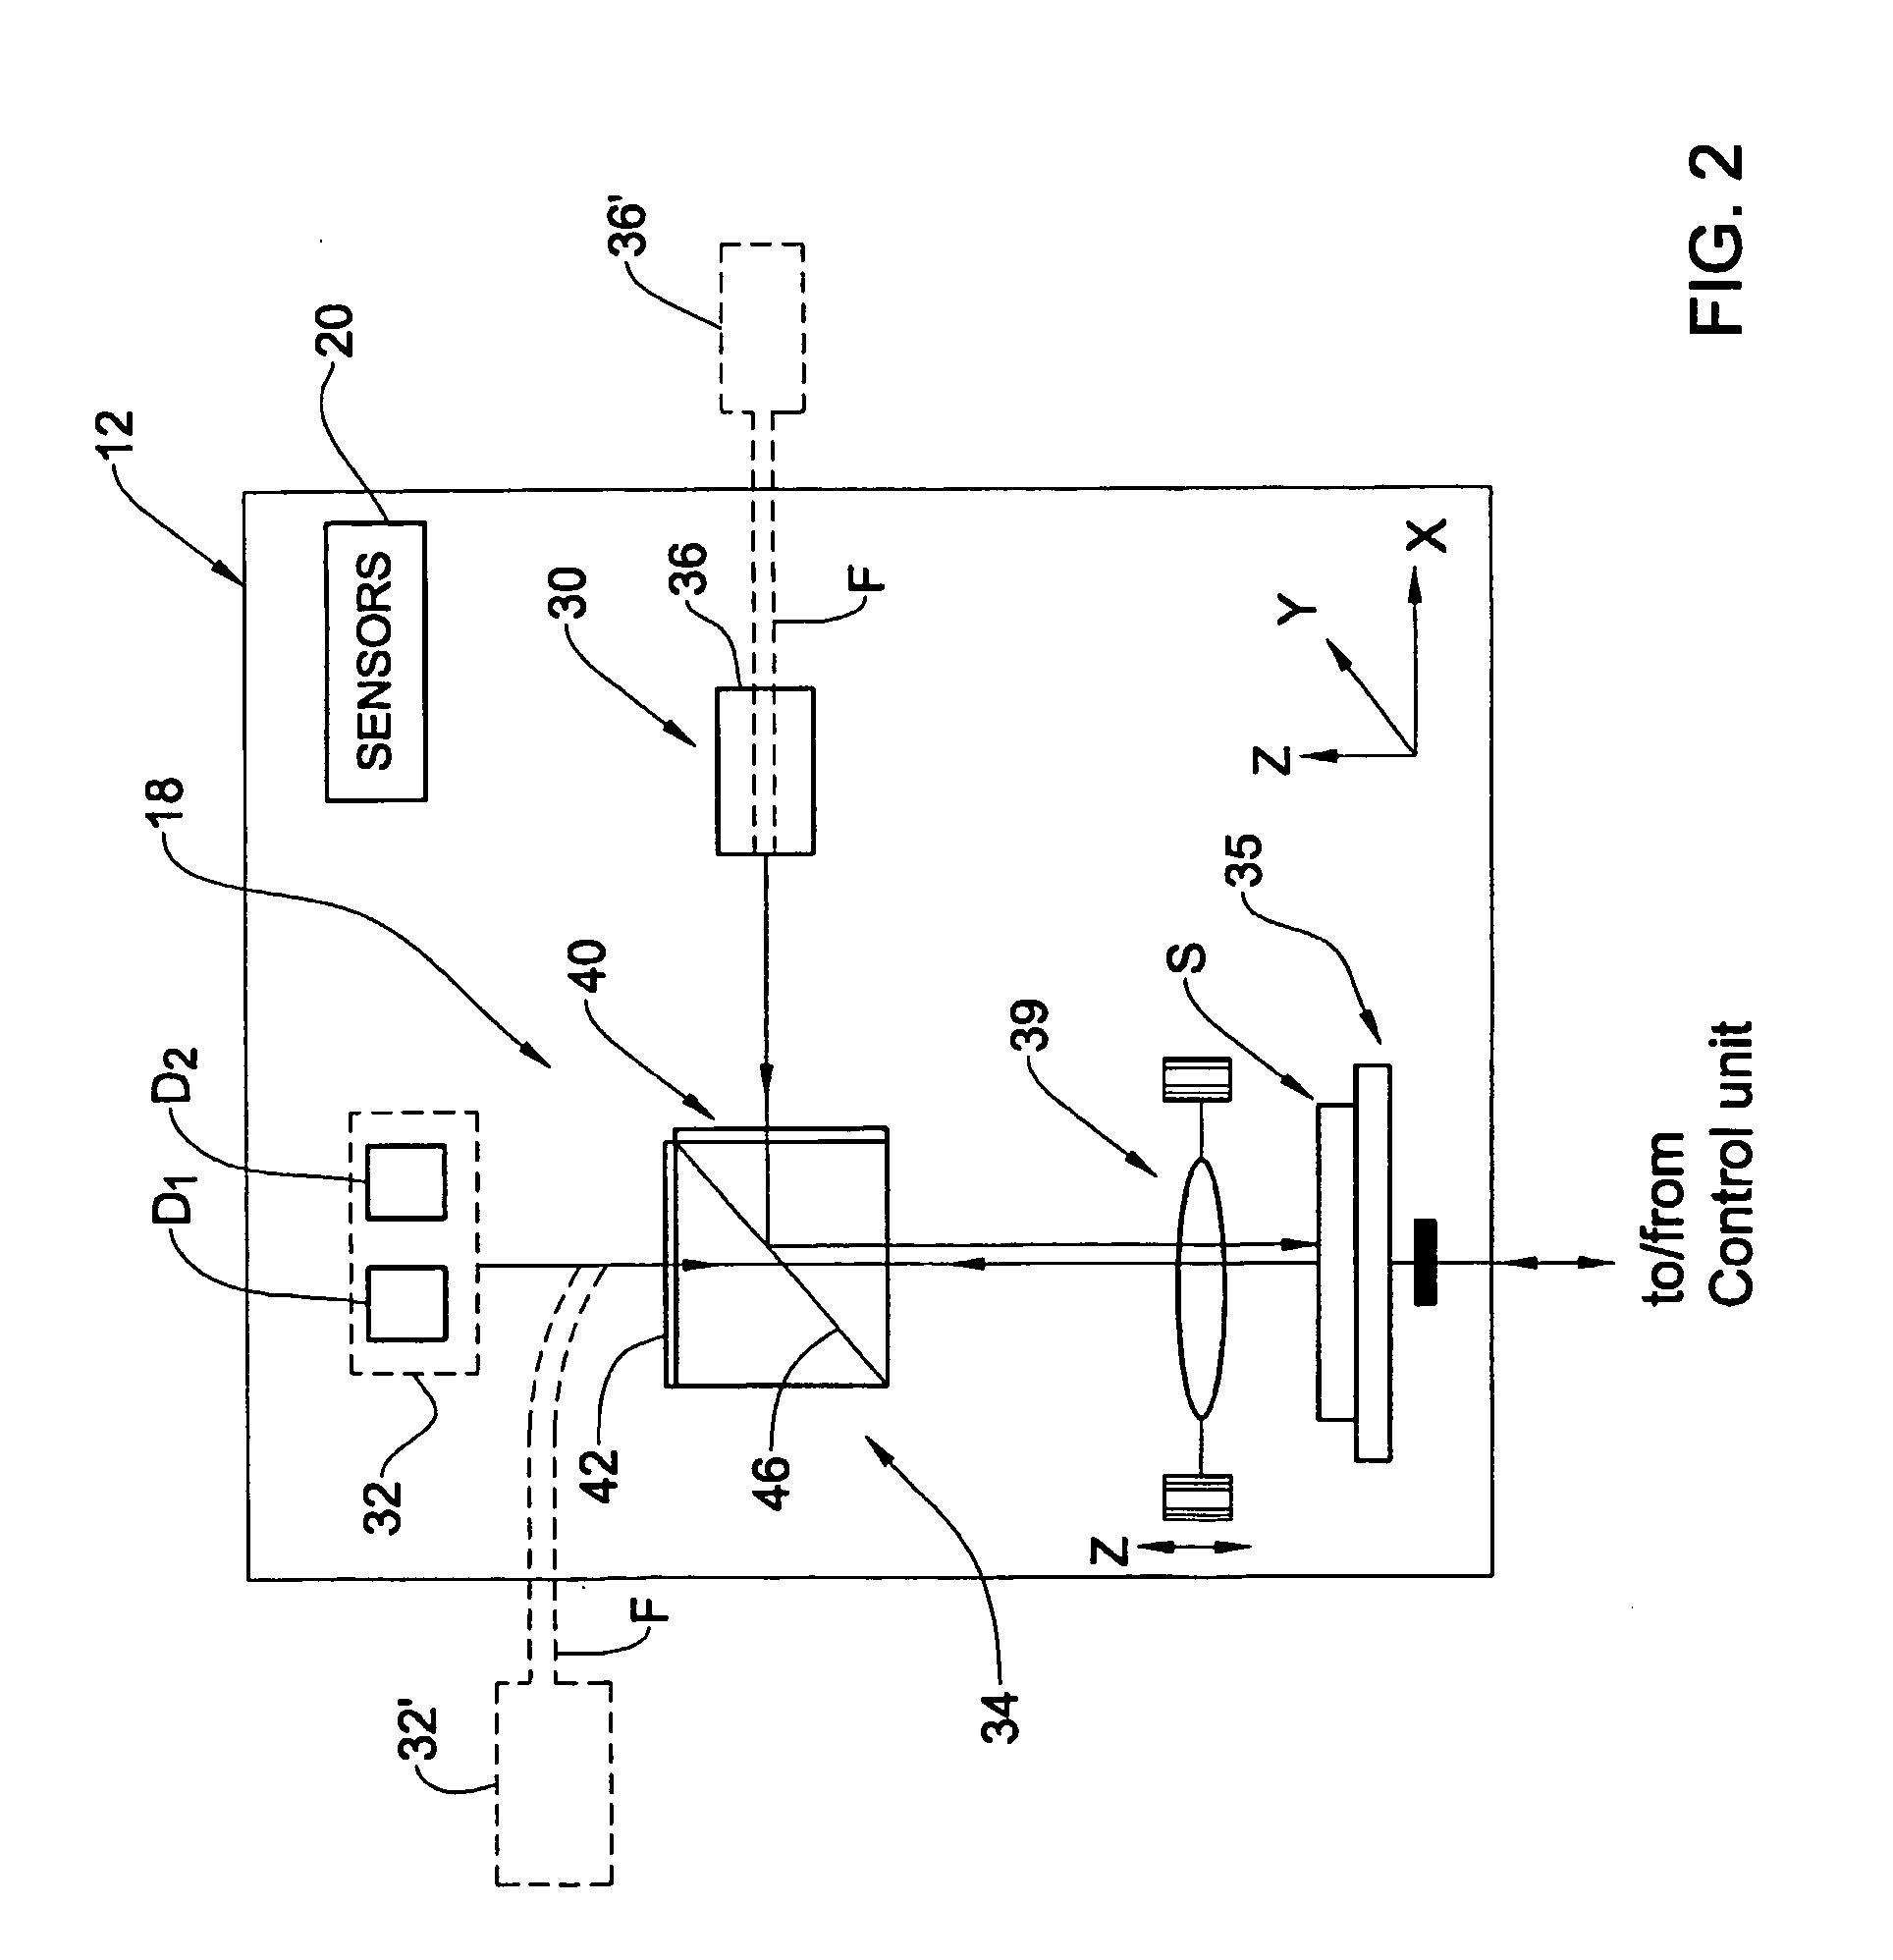 Optical system and method for inspecting fluorescently labeled biological specimens